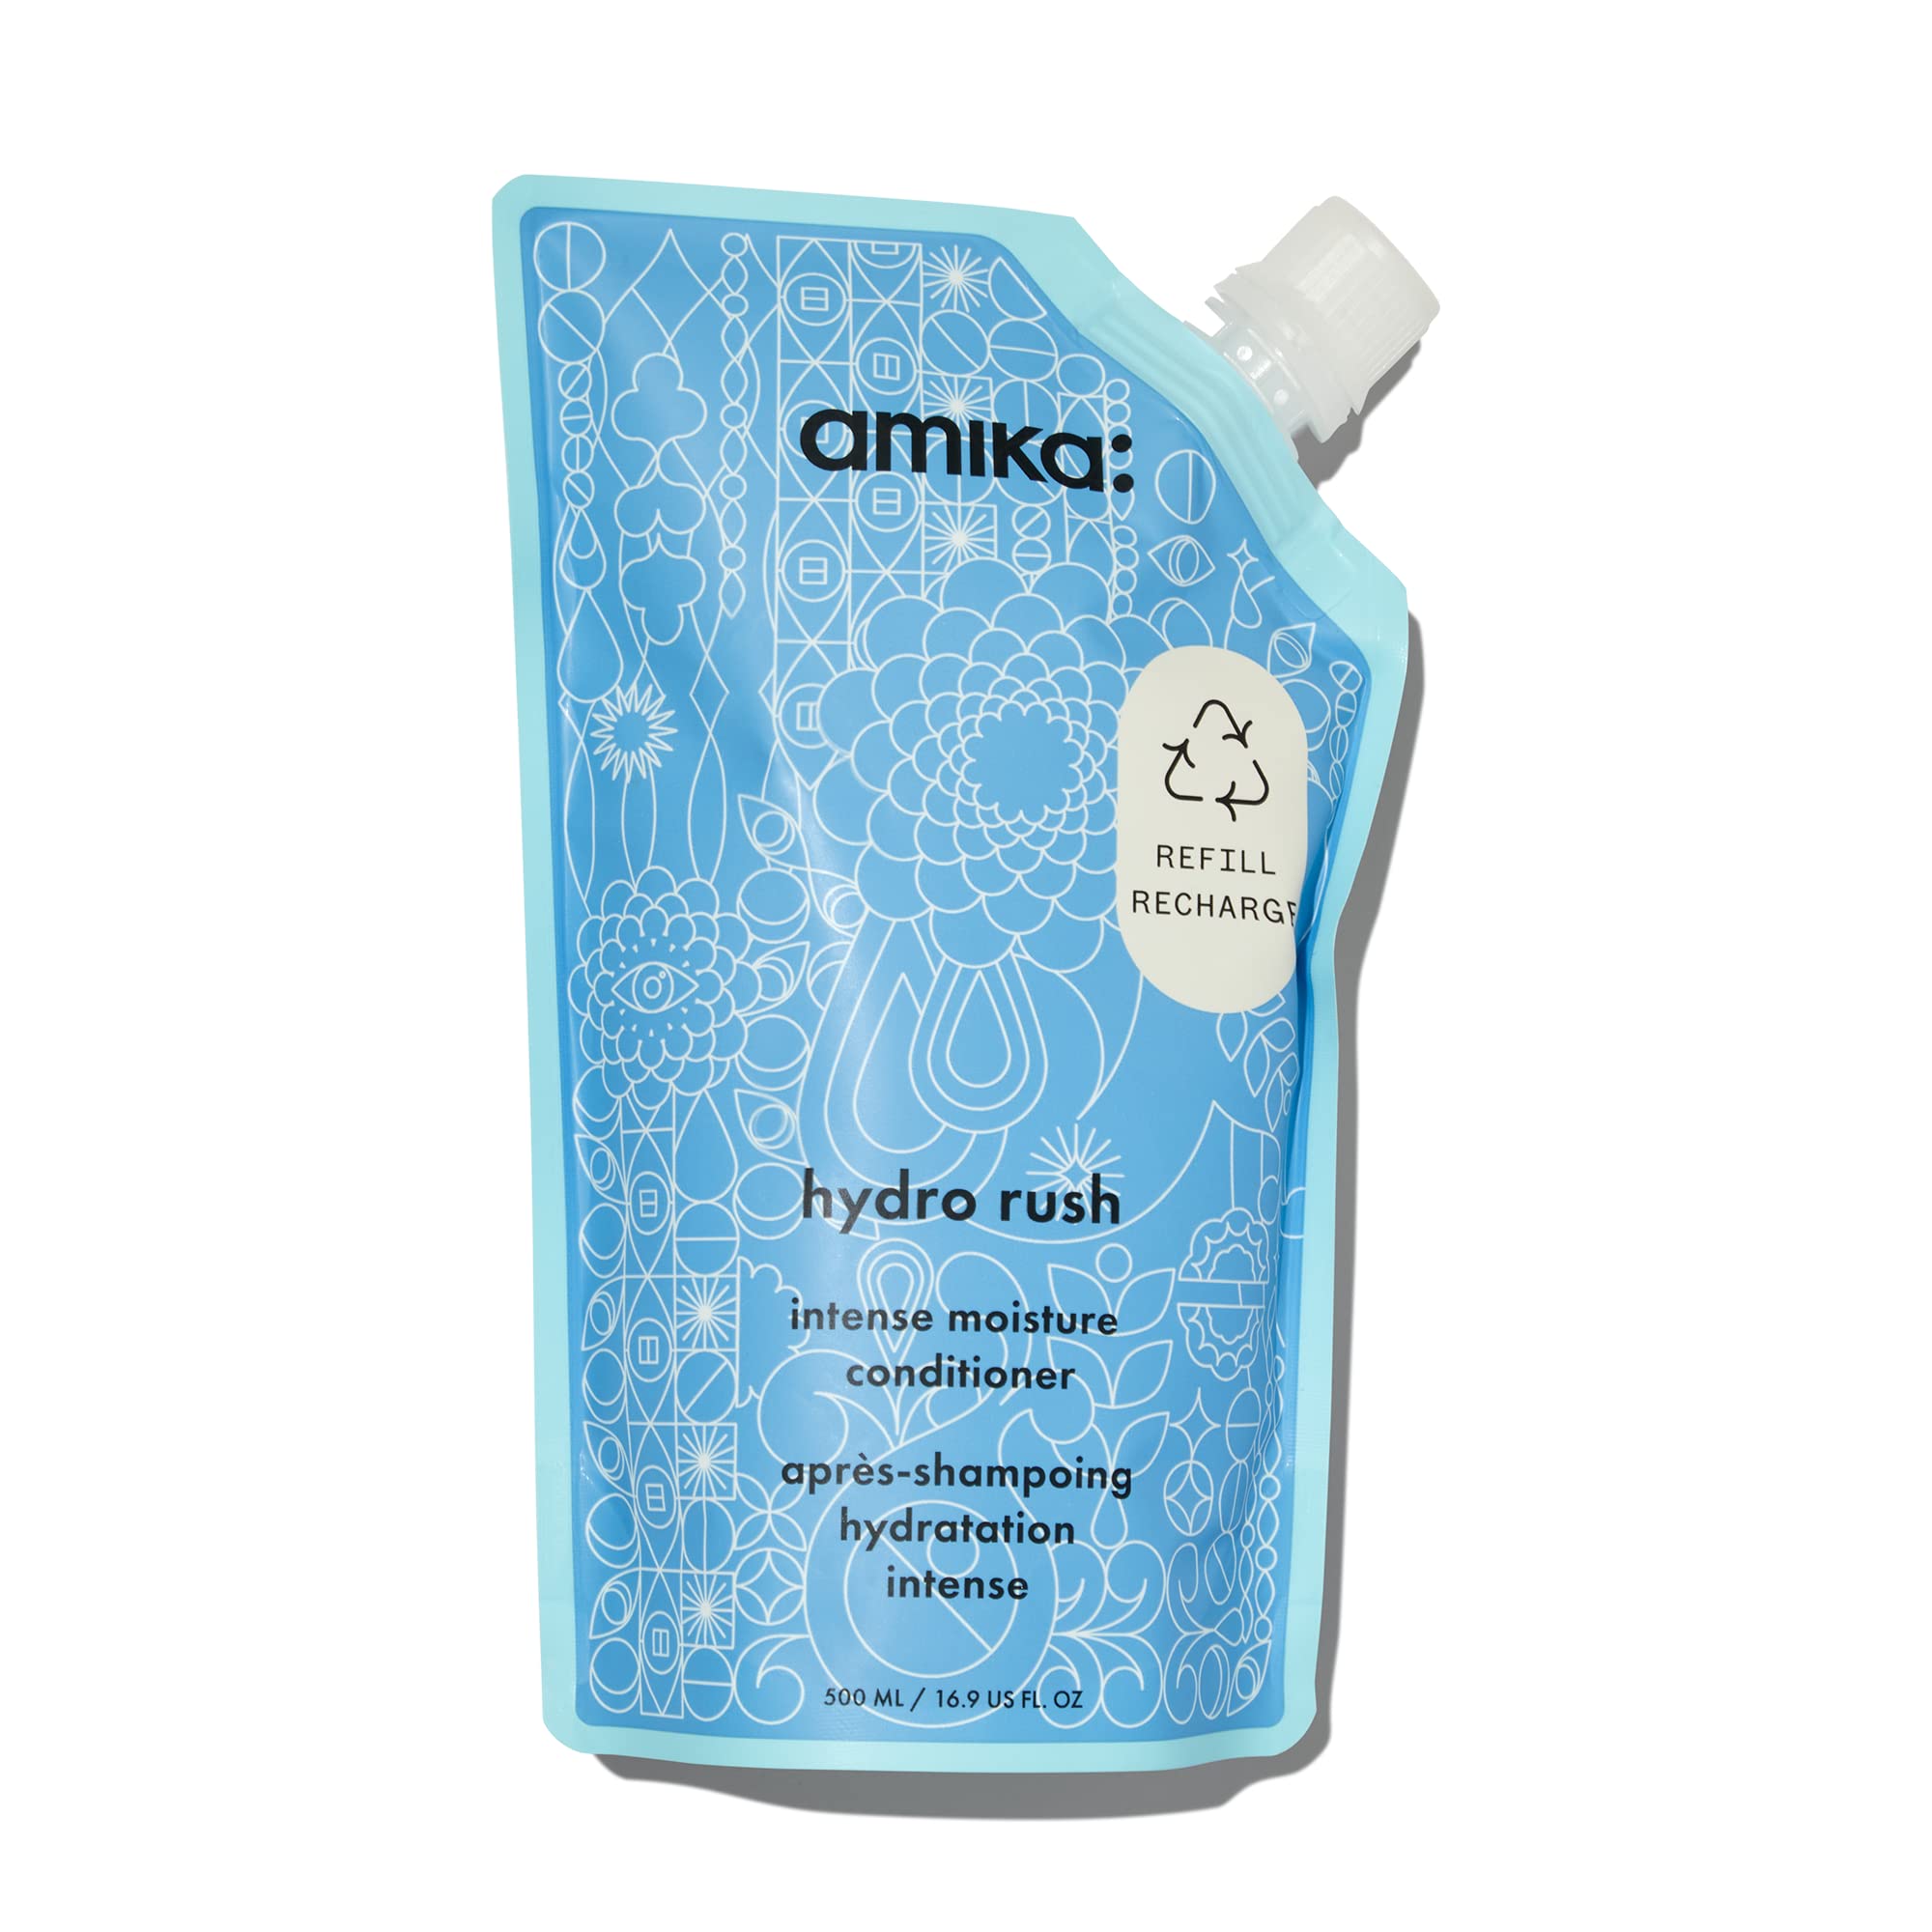 amika hydro rush intense moisture conditioner with hyaluronic acid